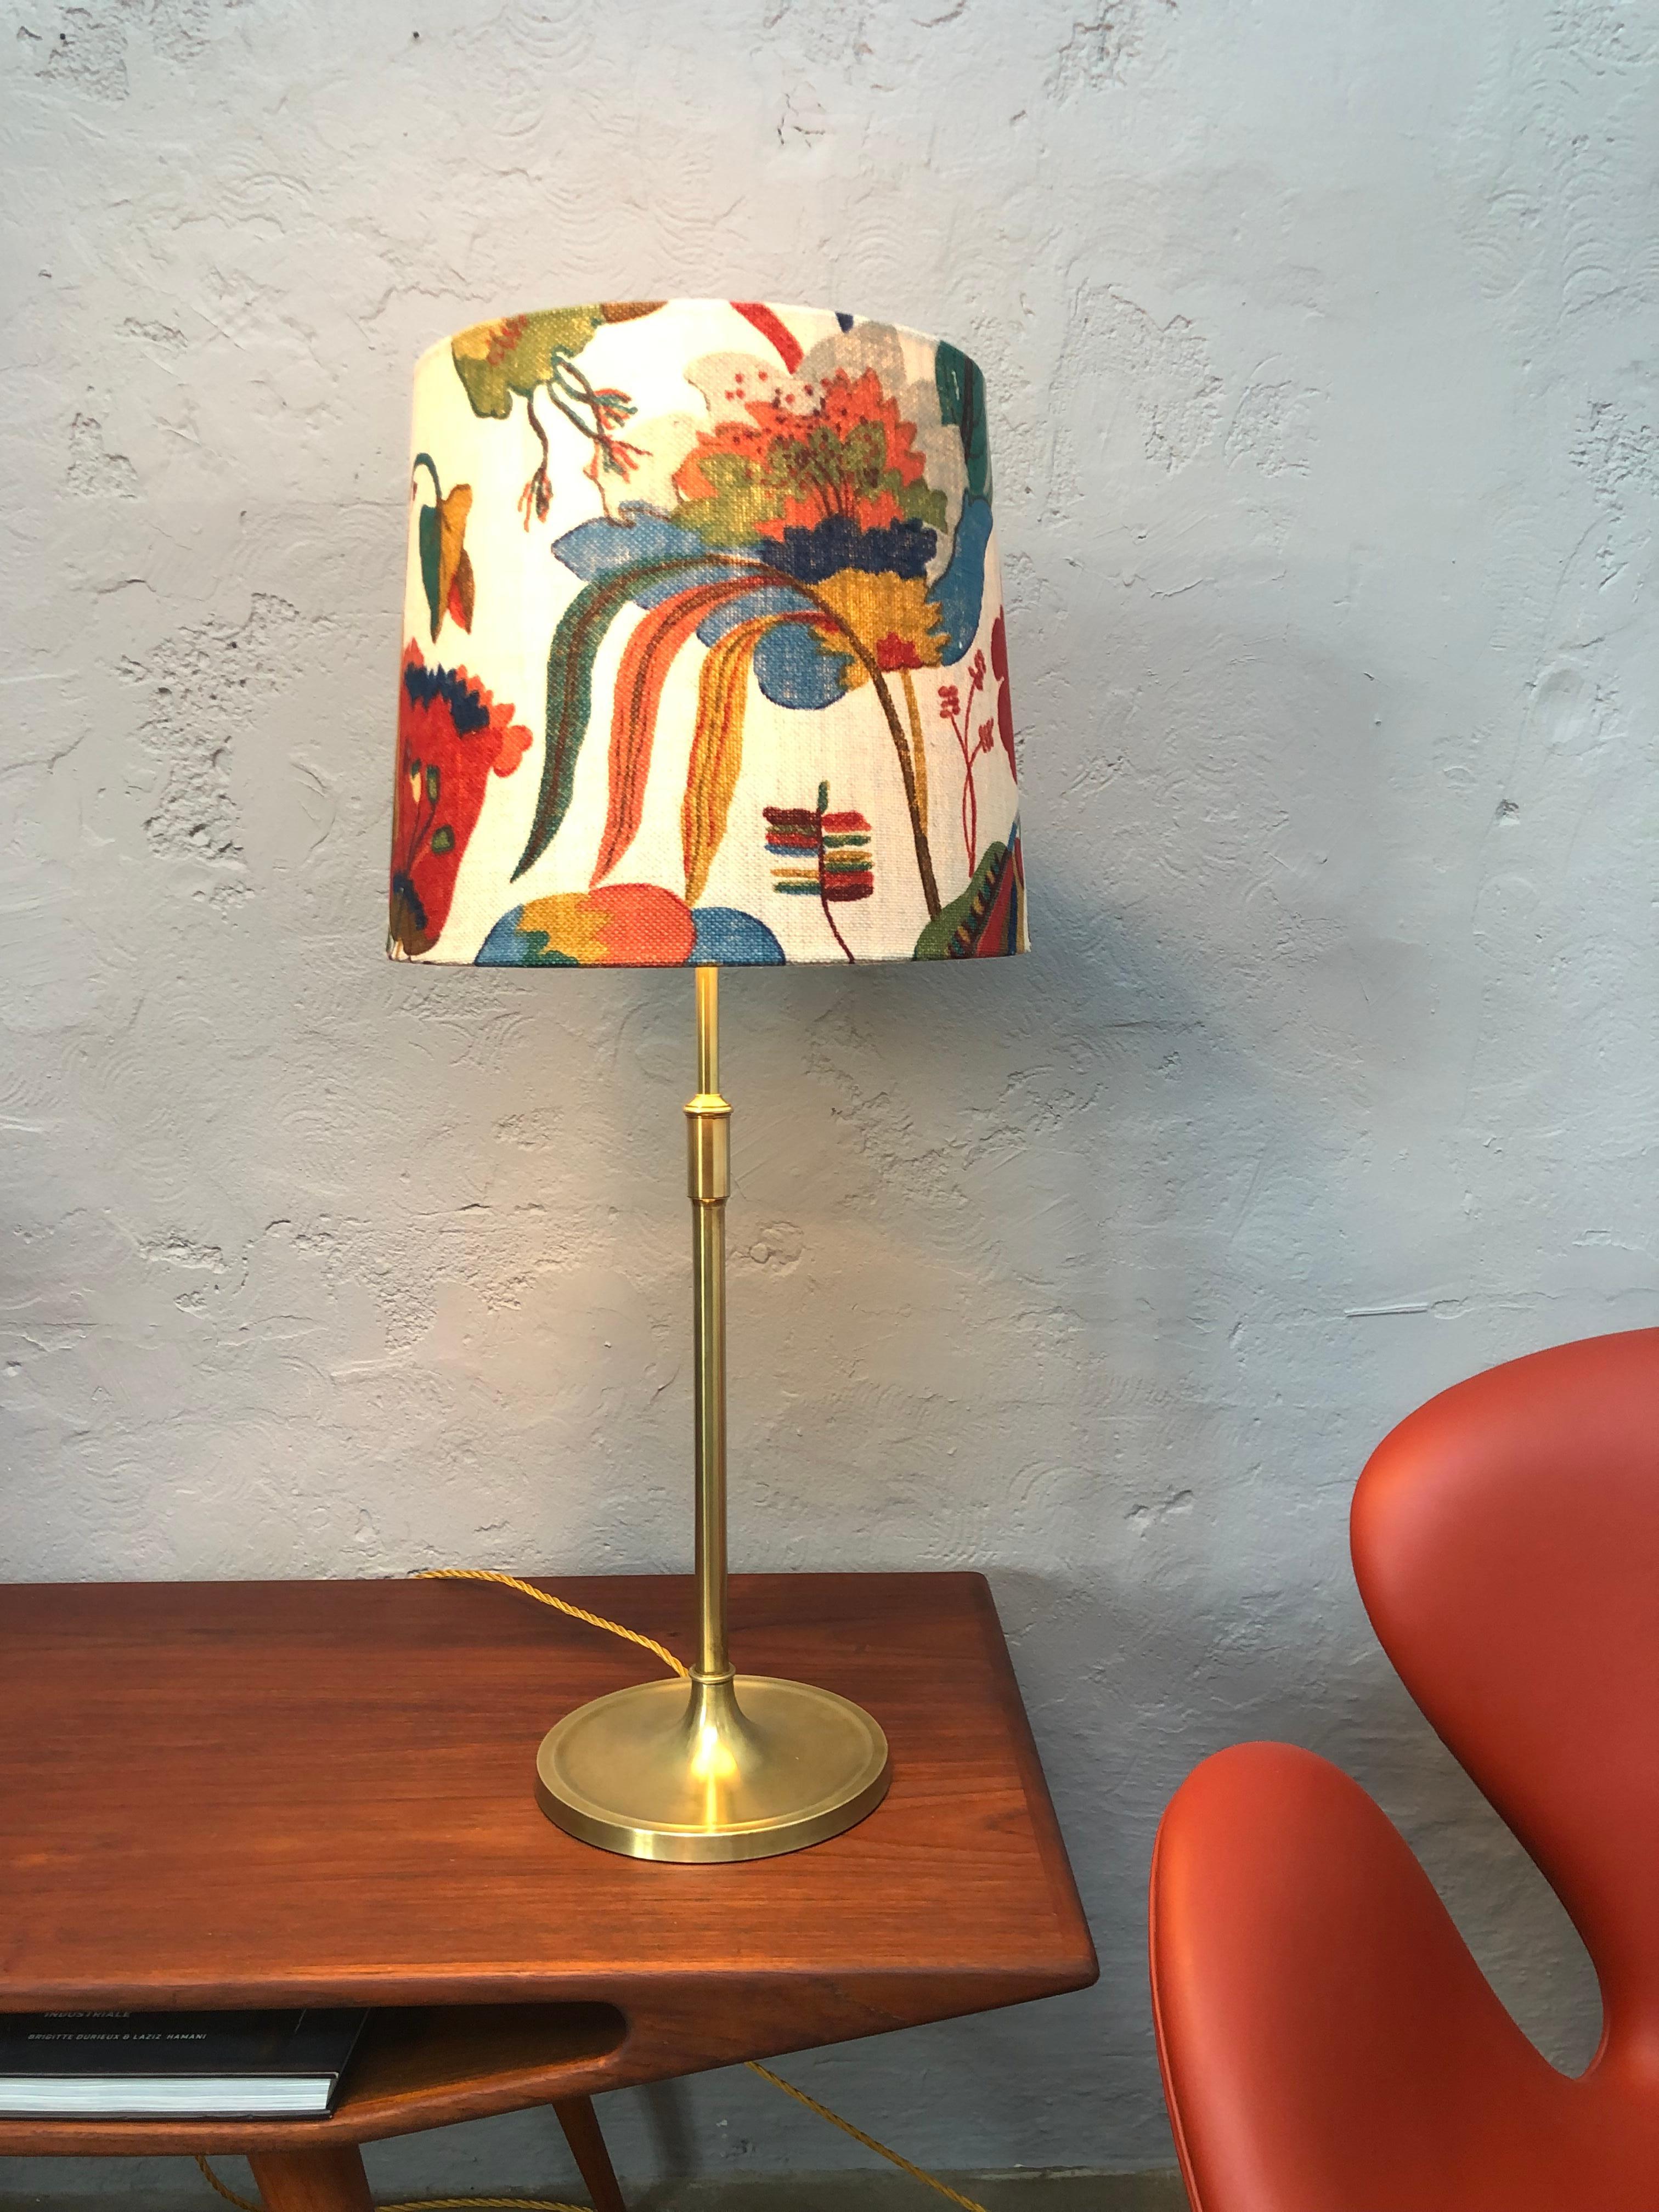 A large telescopic vintage brass table lamp model 328 designed by Esben Klint for Le Klint from the 1960s. .
Telescopic stem that can be extended from 61 to 81cm so it can also be used as a table or floor lamp.
Rewired and grounded with gold cloth